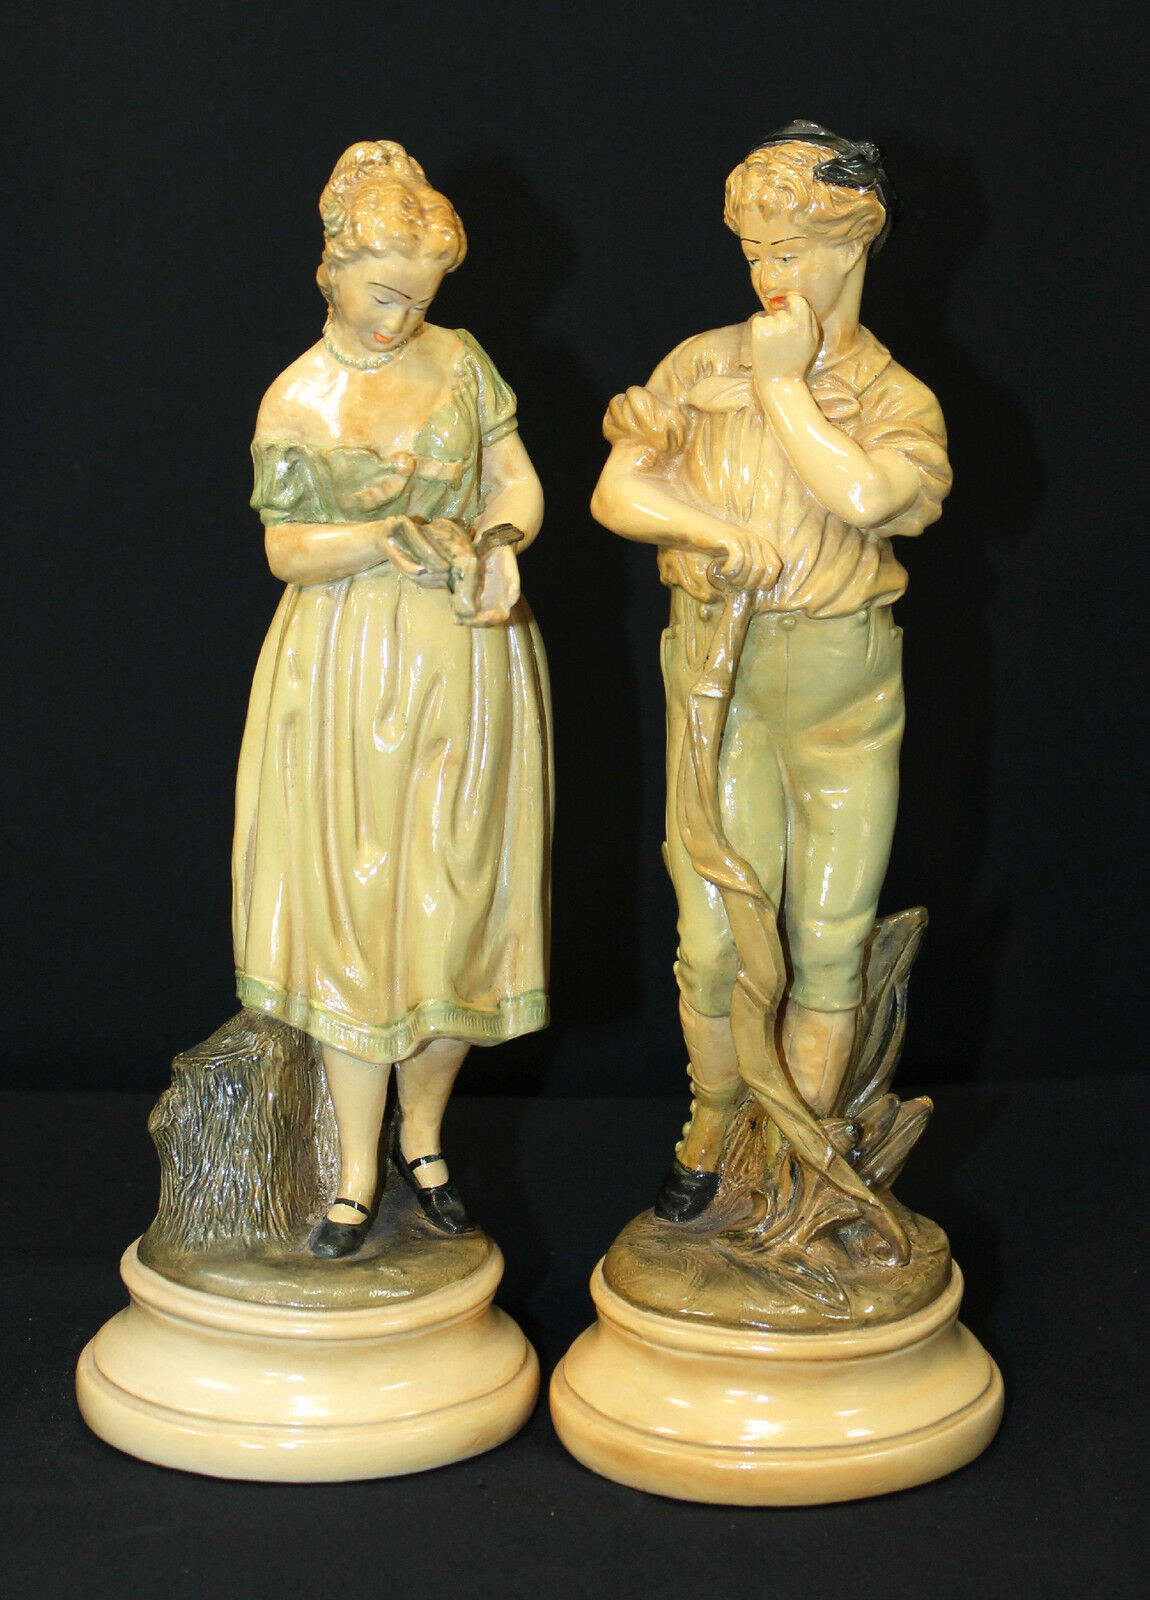 Pair of vintage Borghese Peasant Couple - Woman and Man Cast Plaster Statues